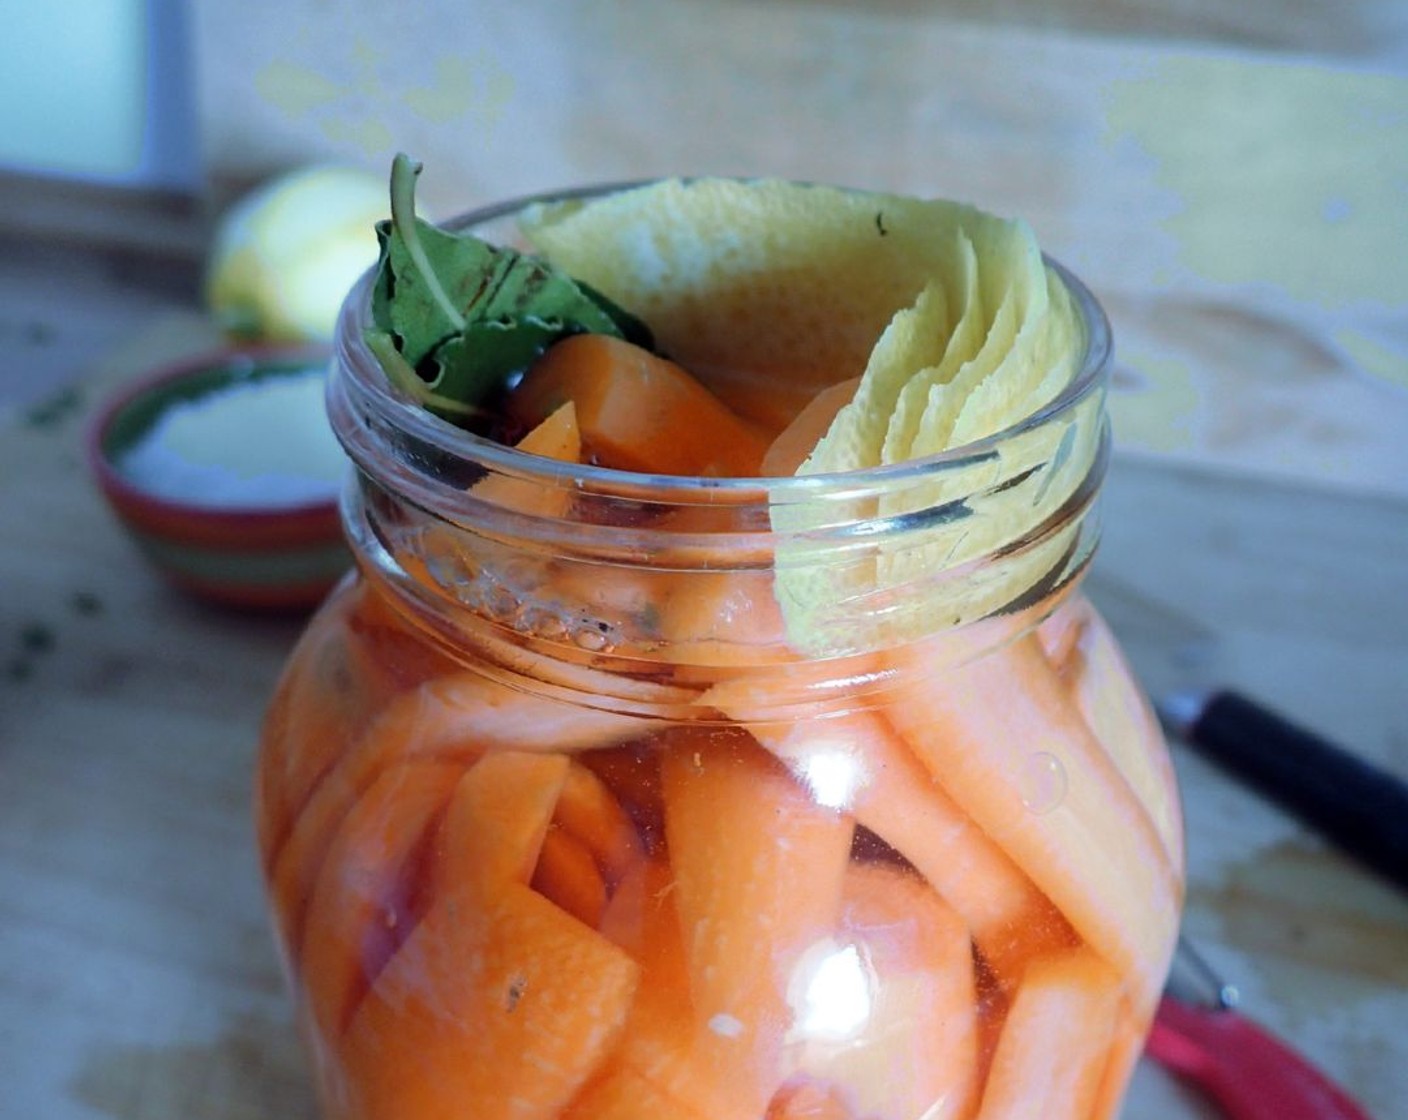 step 3 Fill up the jar with carrots, zest of the Lemon (1/2), sage leaves and Filtered Water (to taste). If you are not using a bubbler, airlock, leave a few centimeters from the top clear to avoid the jar leaking while it ferments. However, make sure all carrots are covered with water.